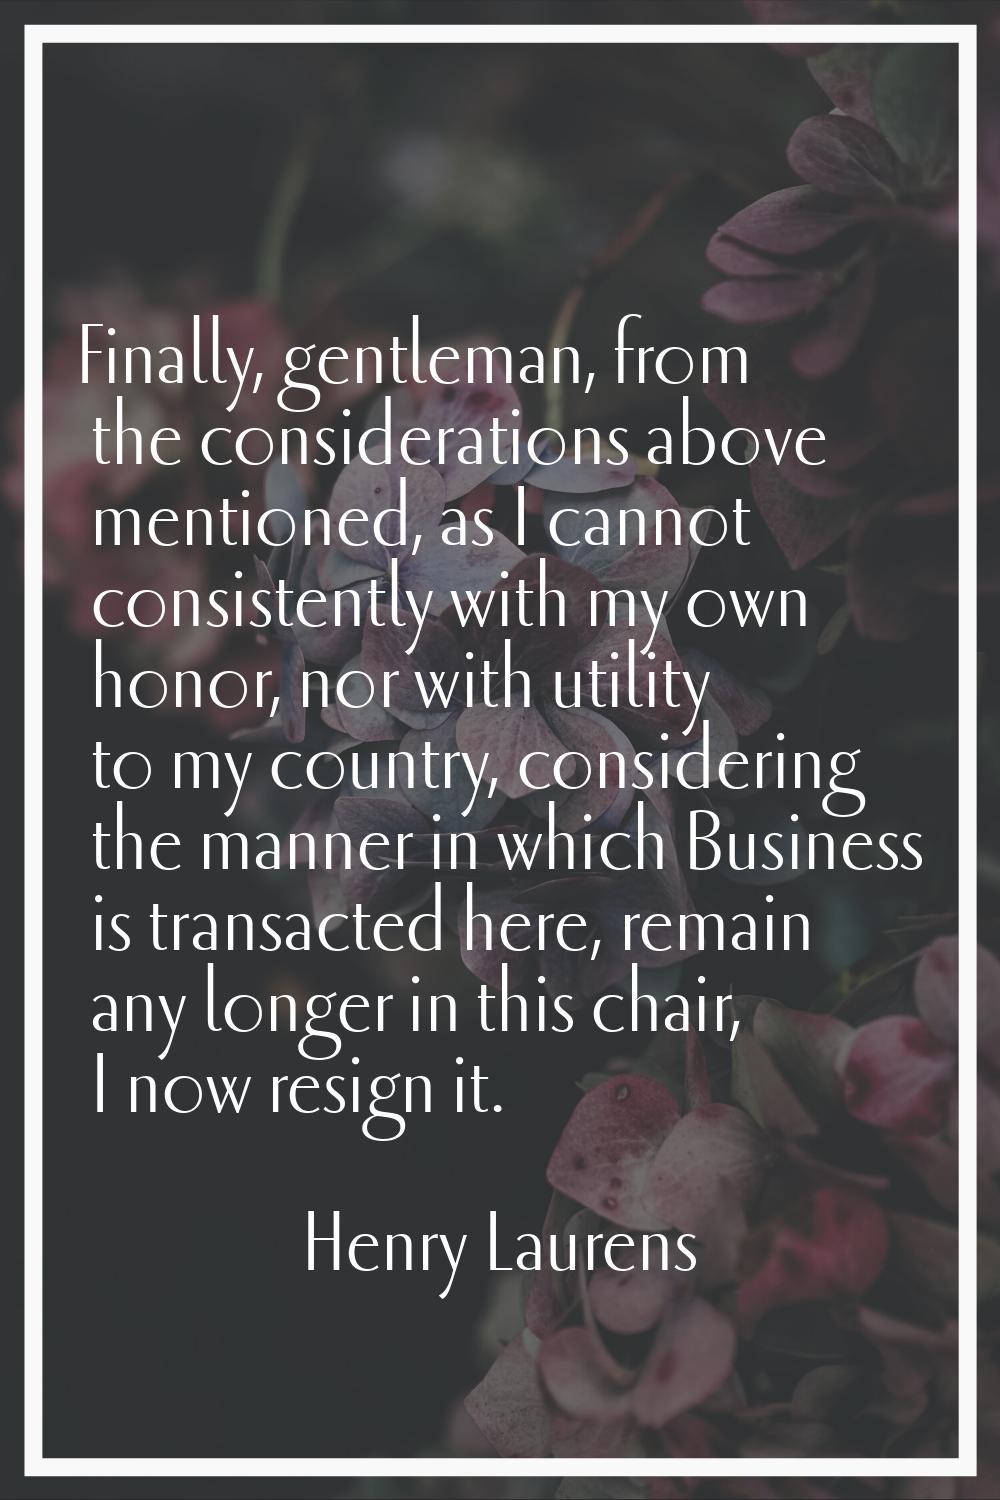 Finally, gentleman, from the considerations above mentioned, as I cannot consistently with my own h